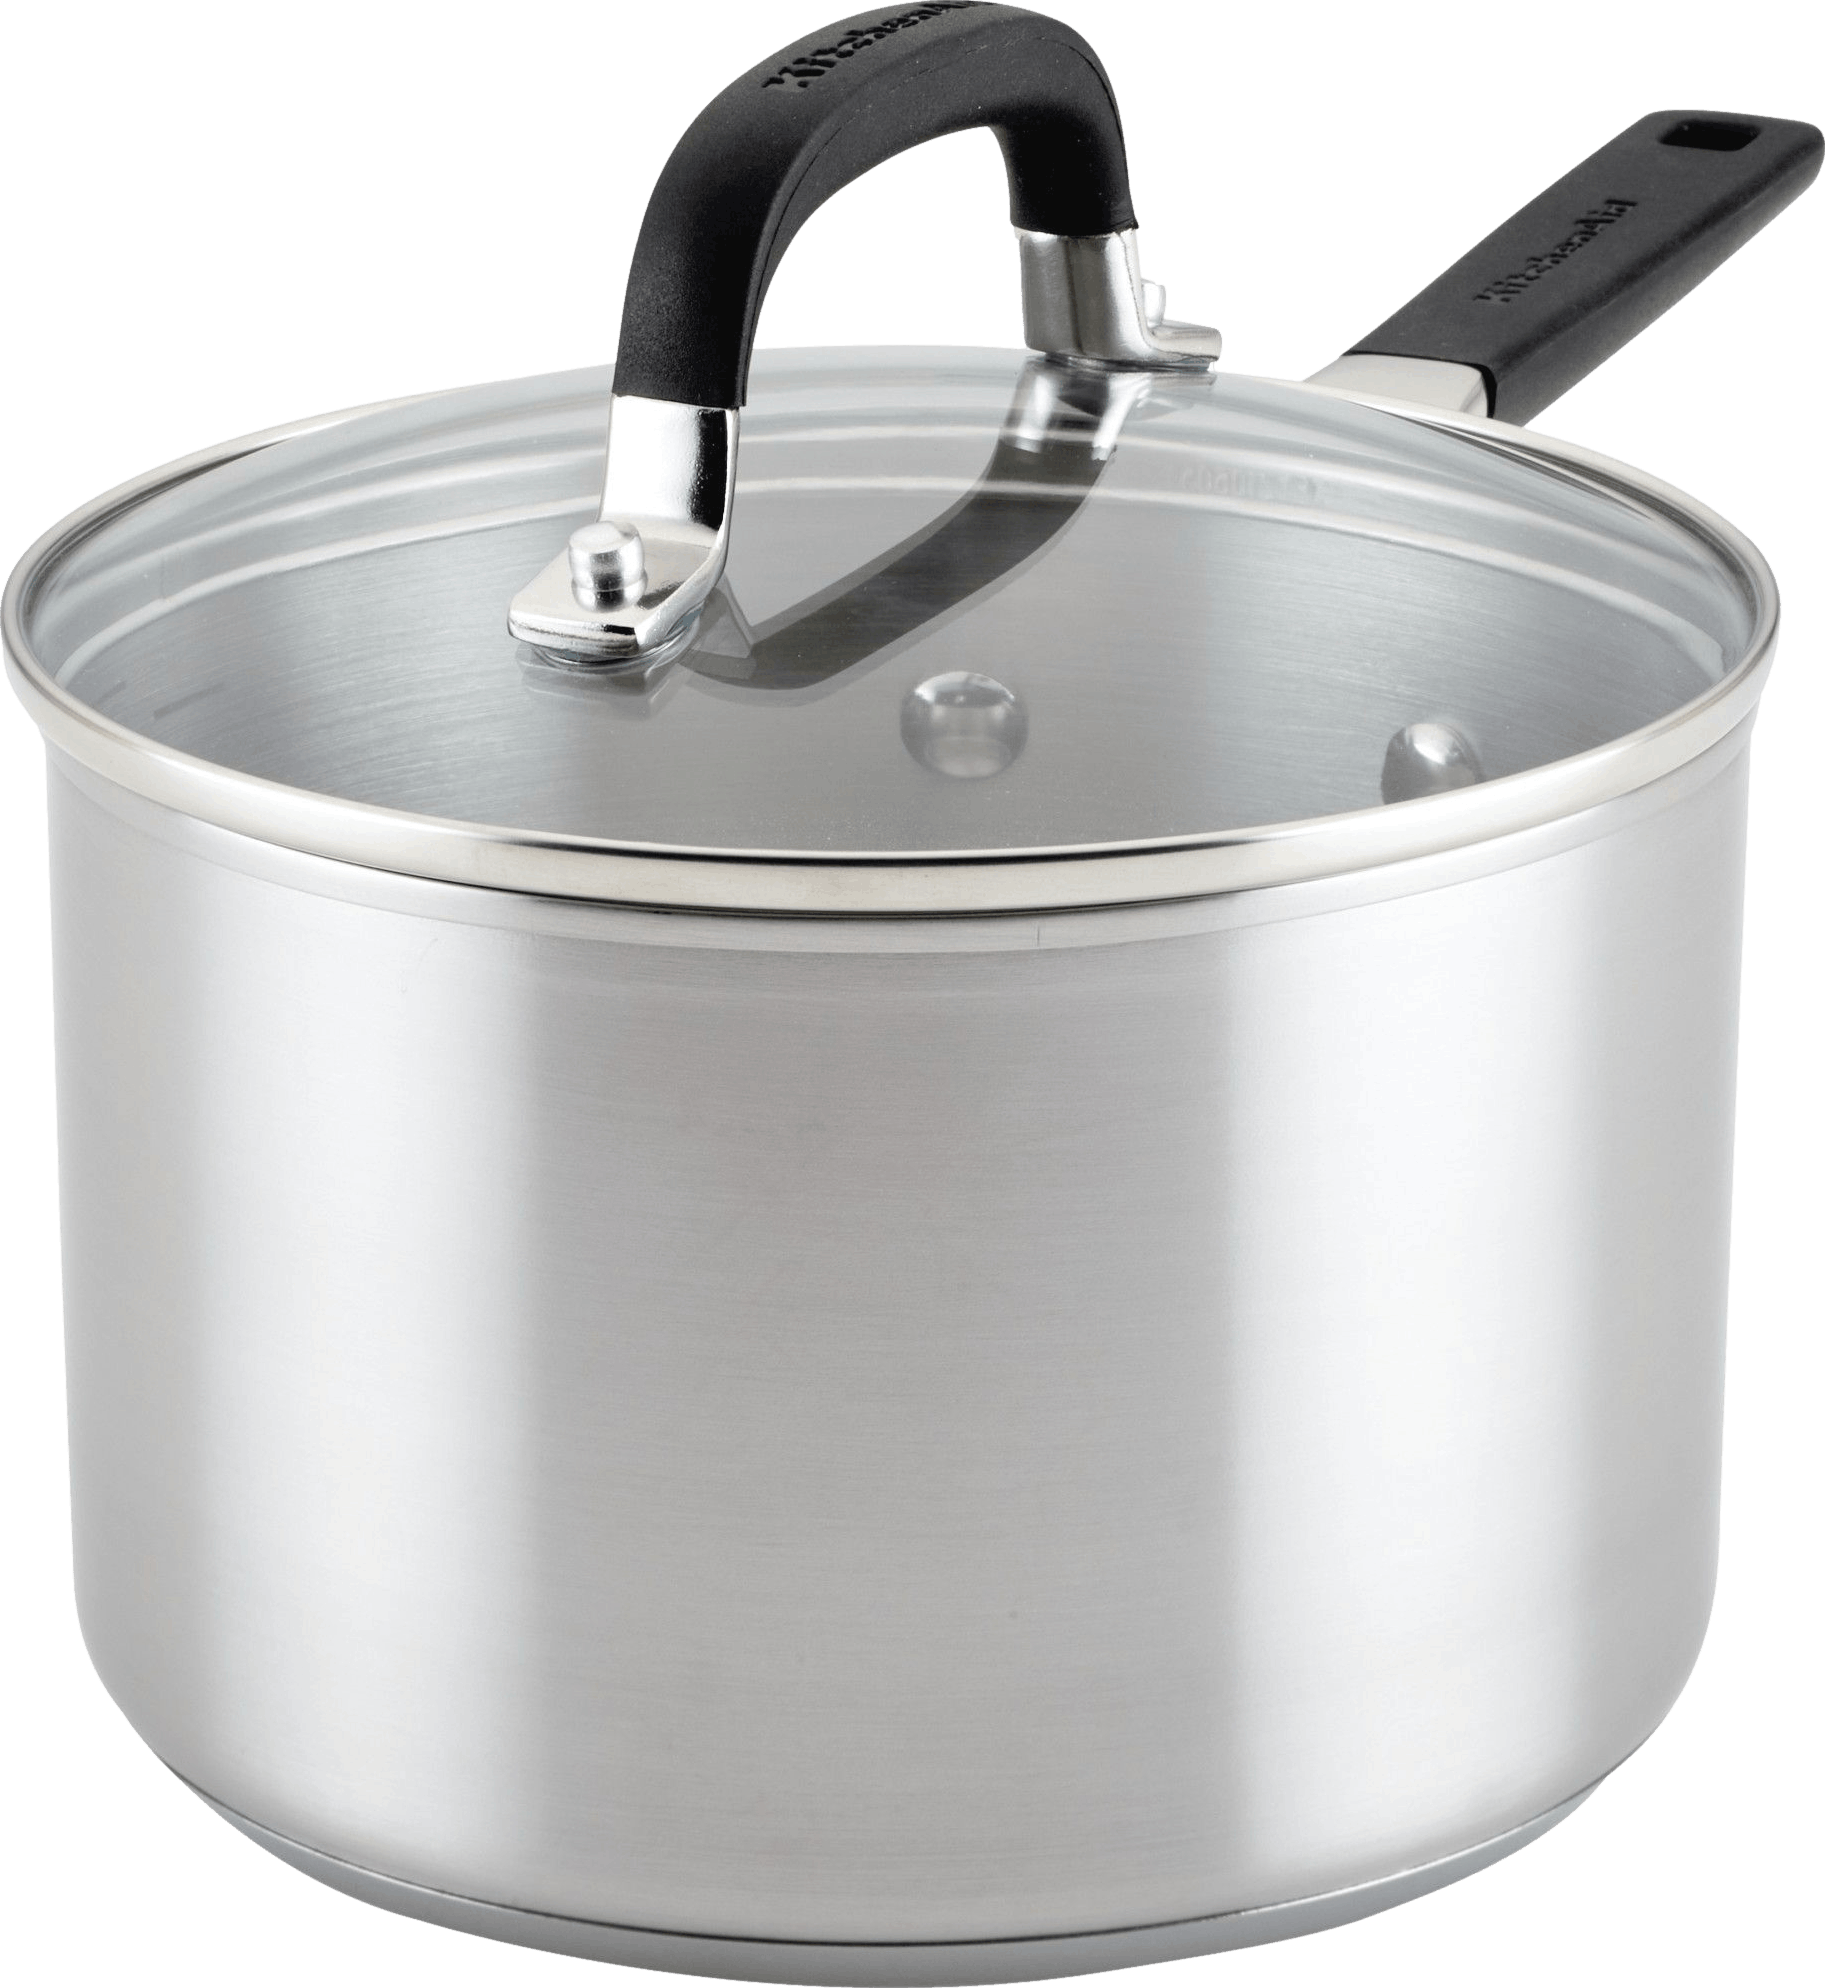 KitchenAid Stainless Steel Induction Saucepan with Lid, 3-Quart, Brushed Stainless Steel